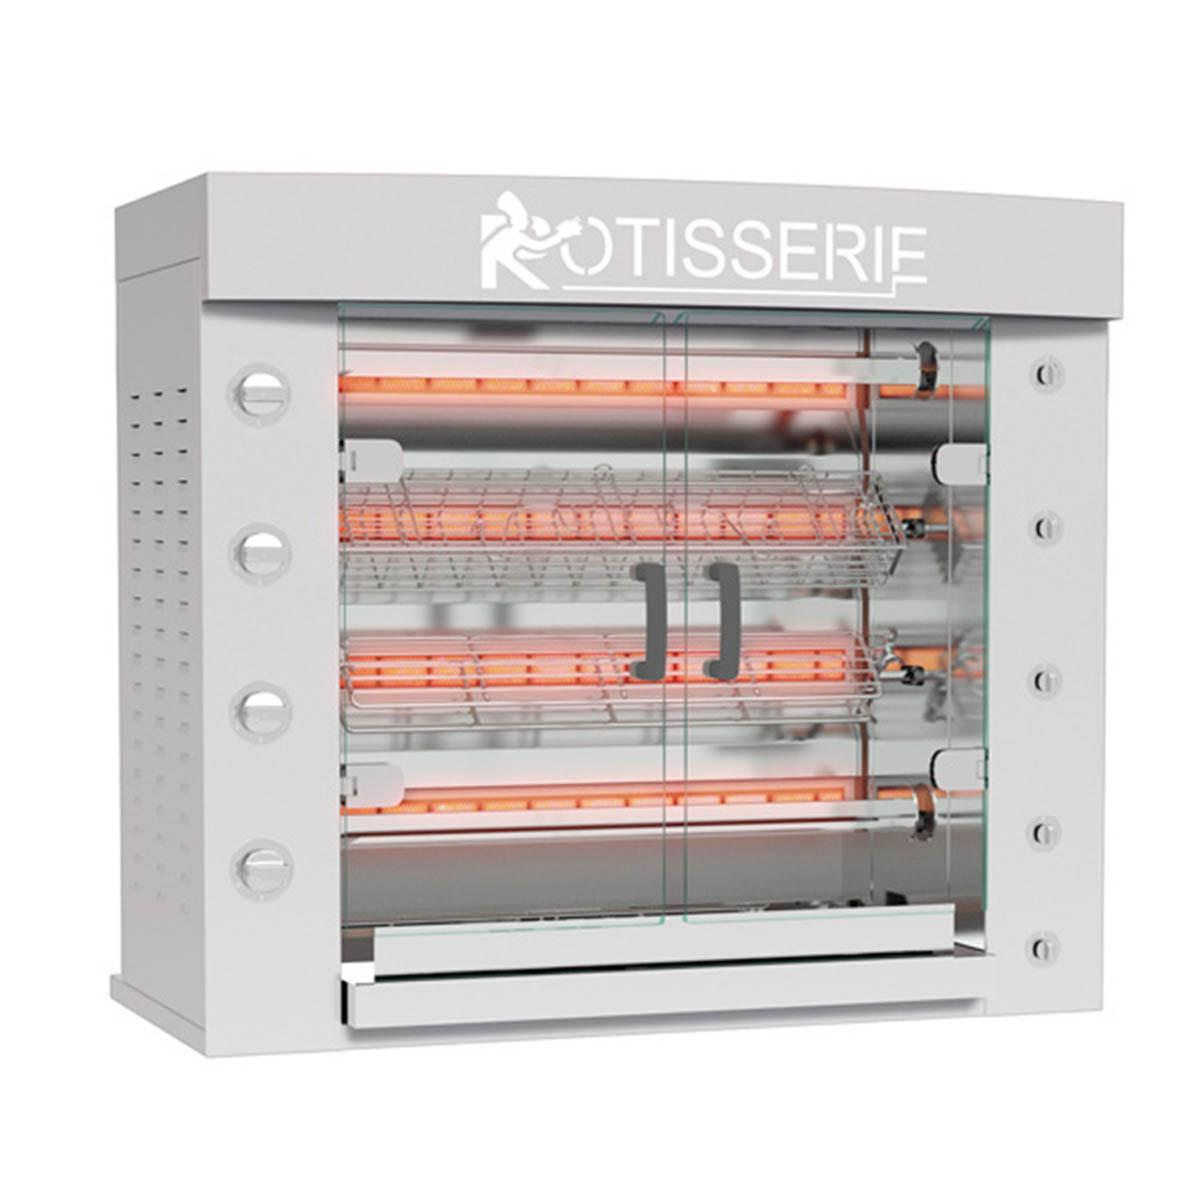 Rotisol USA FB1160-4G-SS Rotisserie Gas Oven